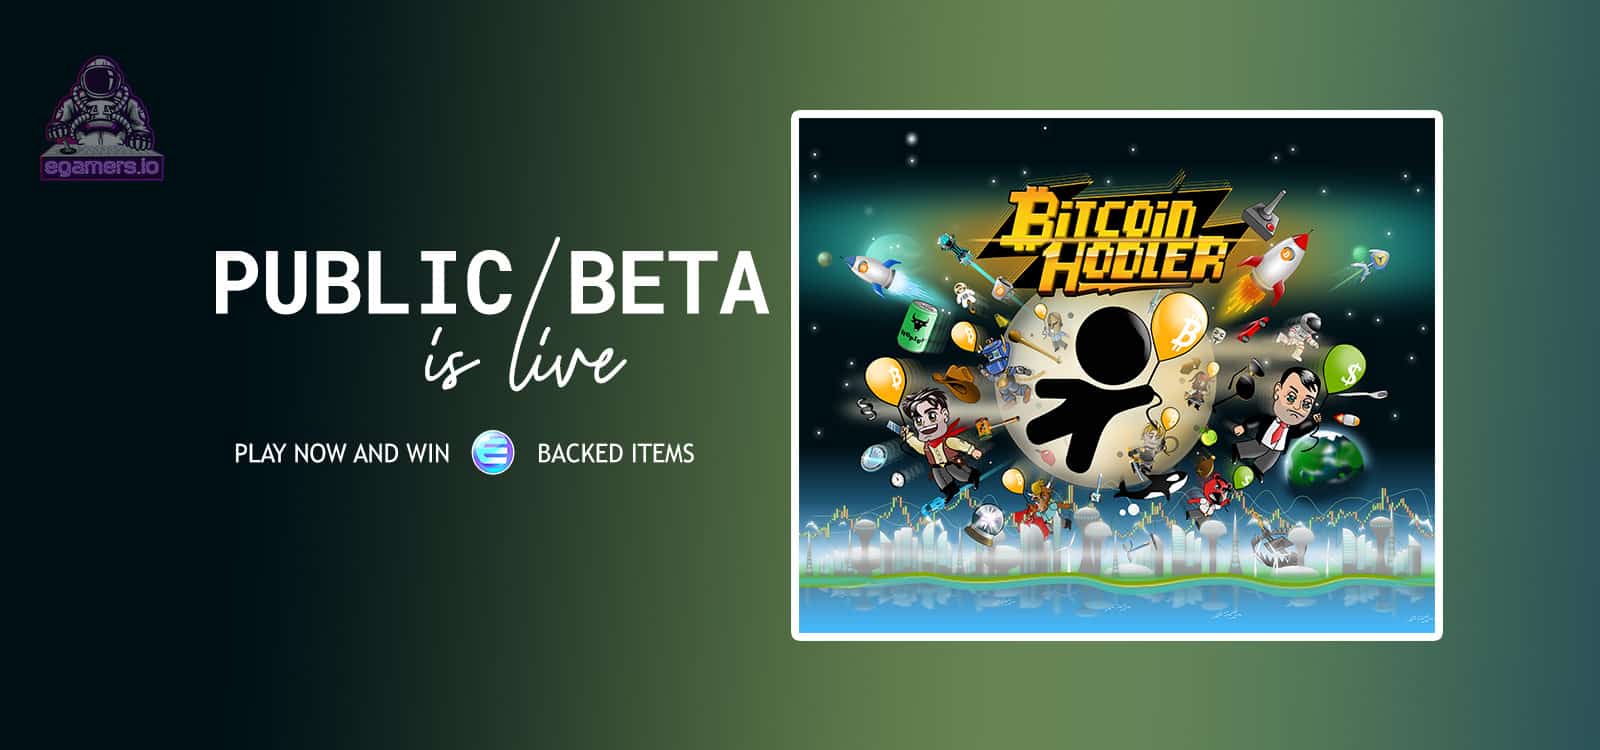 bitcoin hodler public beta launch enjin game How long can you HODL? After some beta testing in the early access mode, BitcoinHodler is now in public beta with Enjin integration enabled. Download the game for free on Google Play and iOS TestFlight.